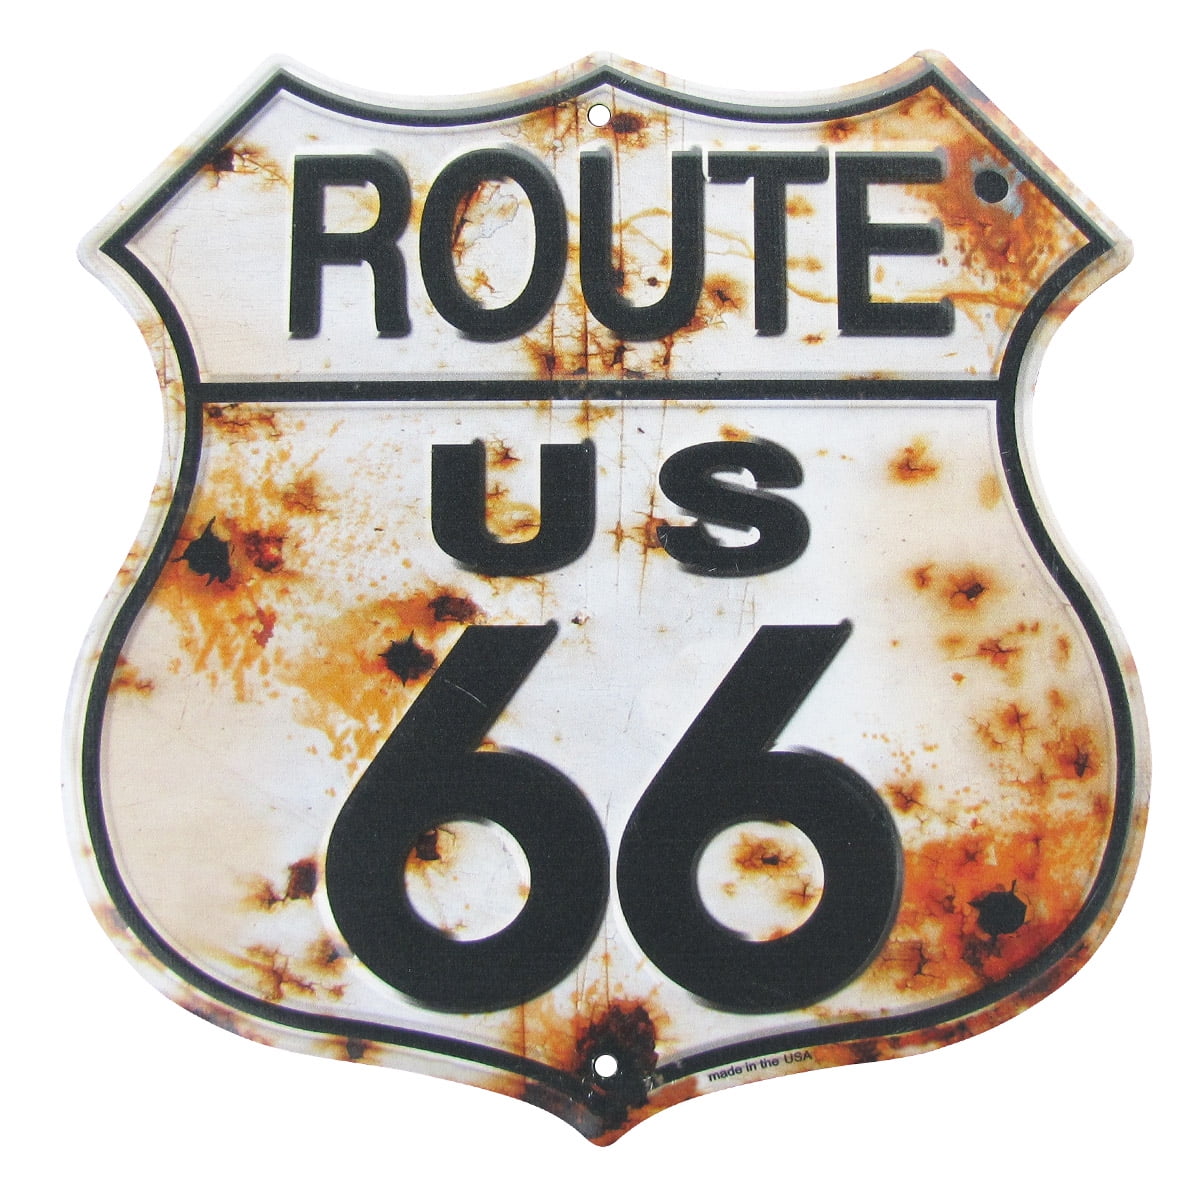 Route 66 tin metal sign home decor department office restaurant US SELLER 